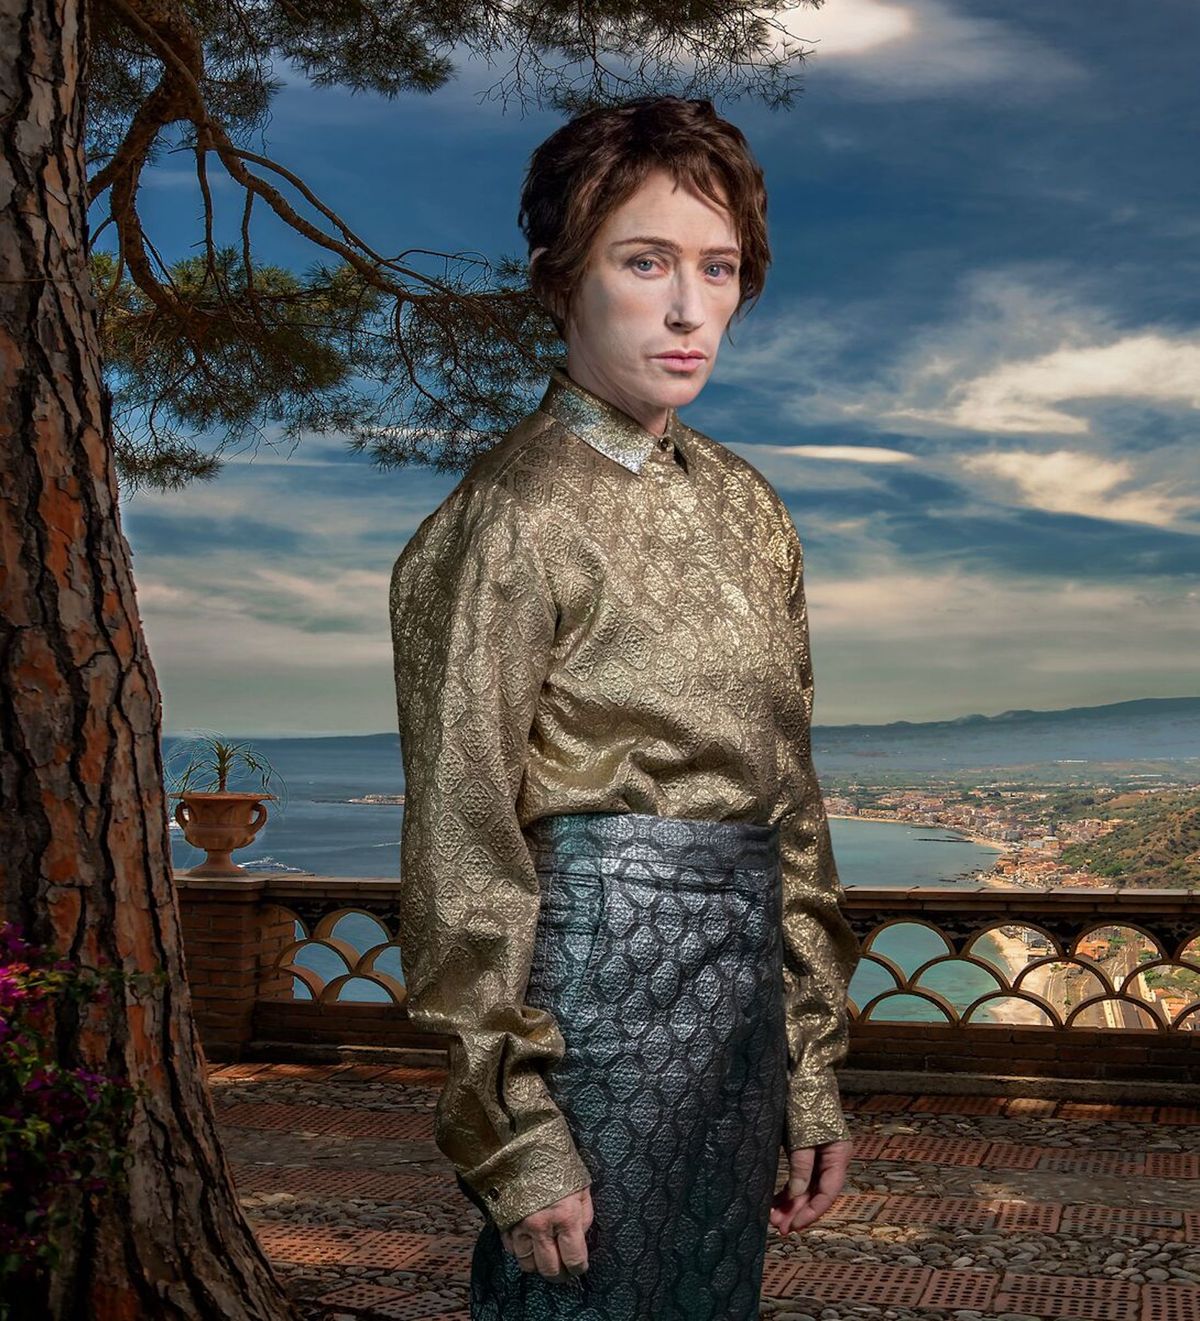 Cindy Sherman on Her First Ever Non-Photographic Works